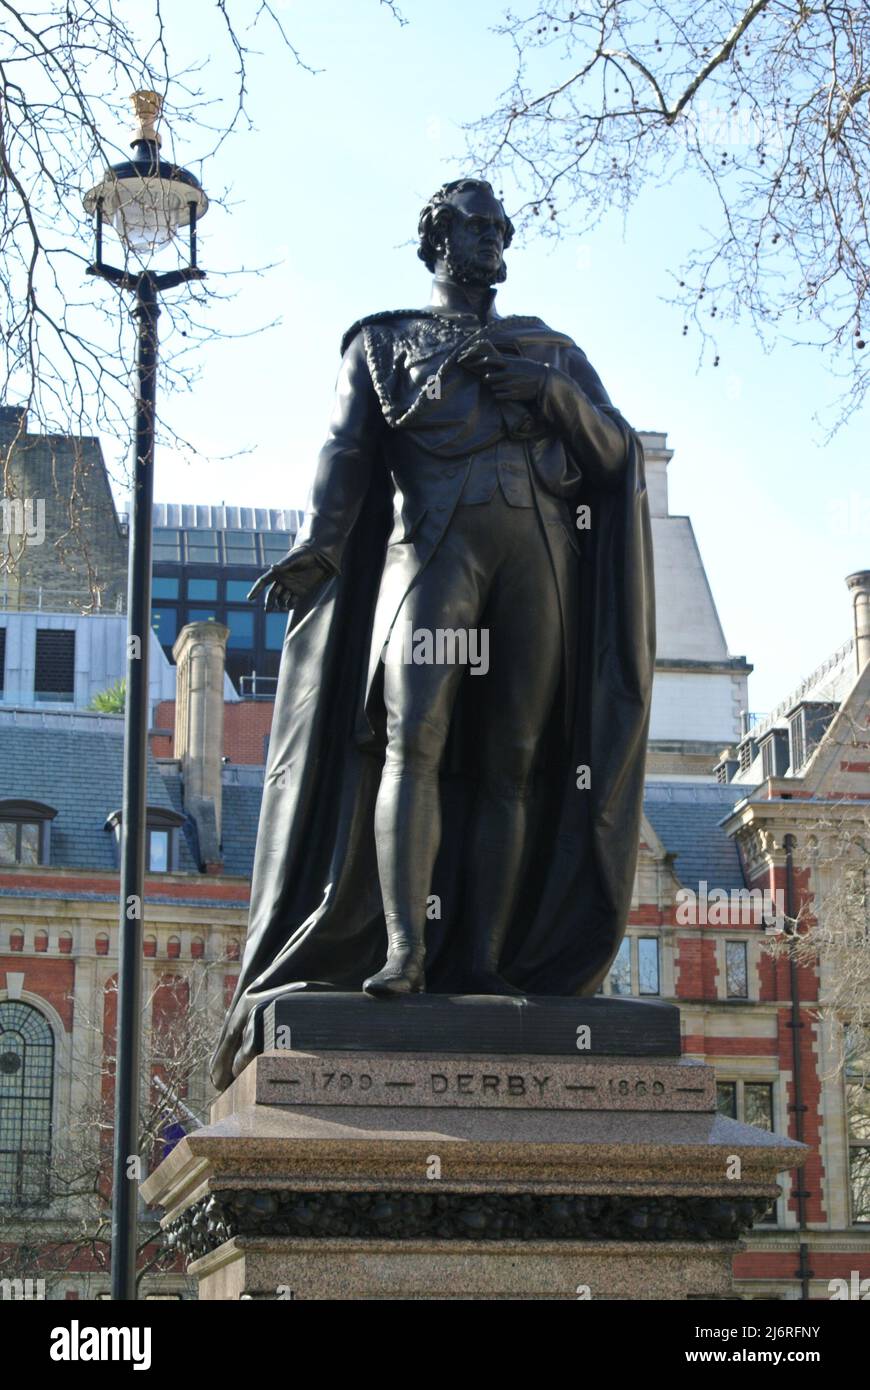 A bronze statue of Edward George Geoffrey Smith Stanley, 14th Earl of Derby, in Parliament Square, London, England, UK. Stock Photo